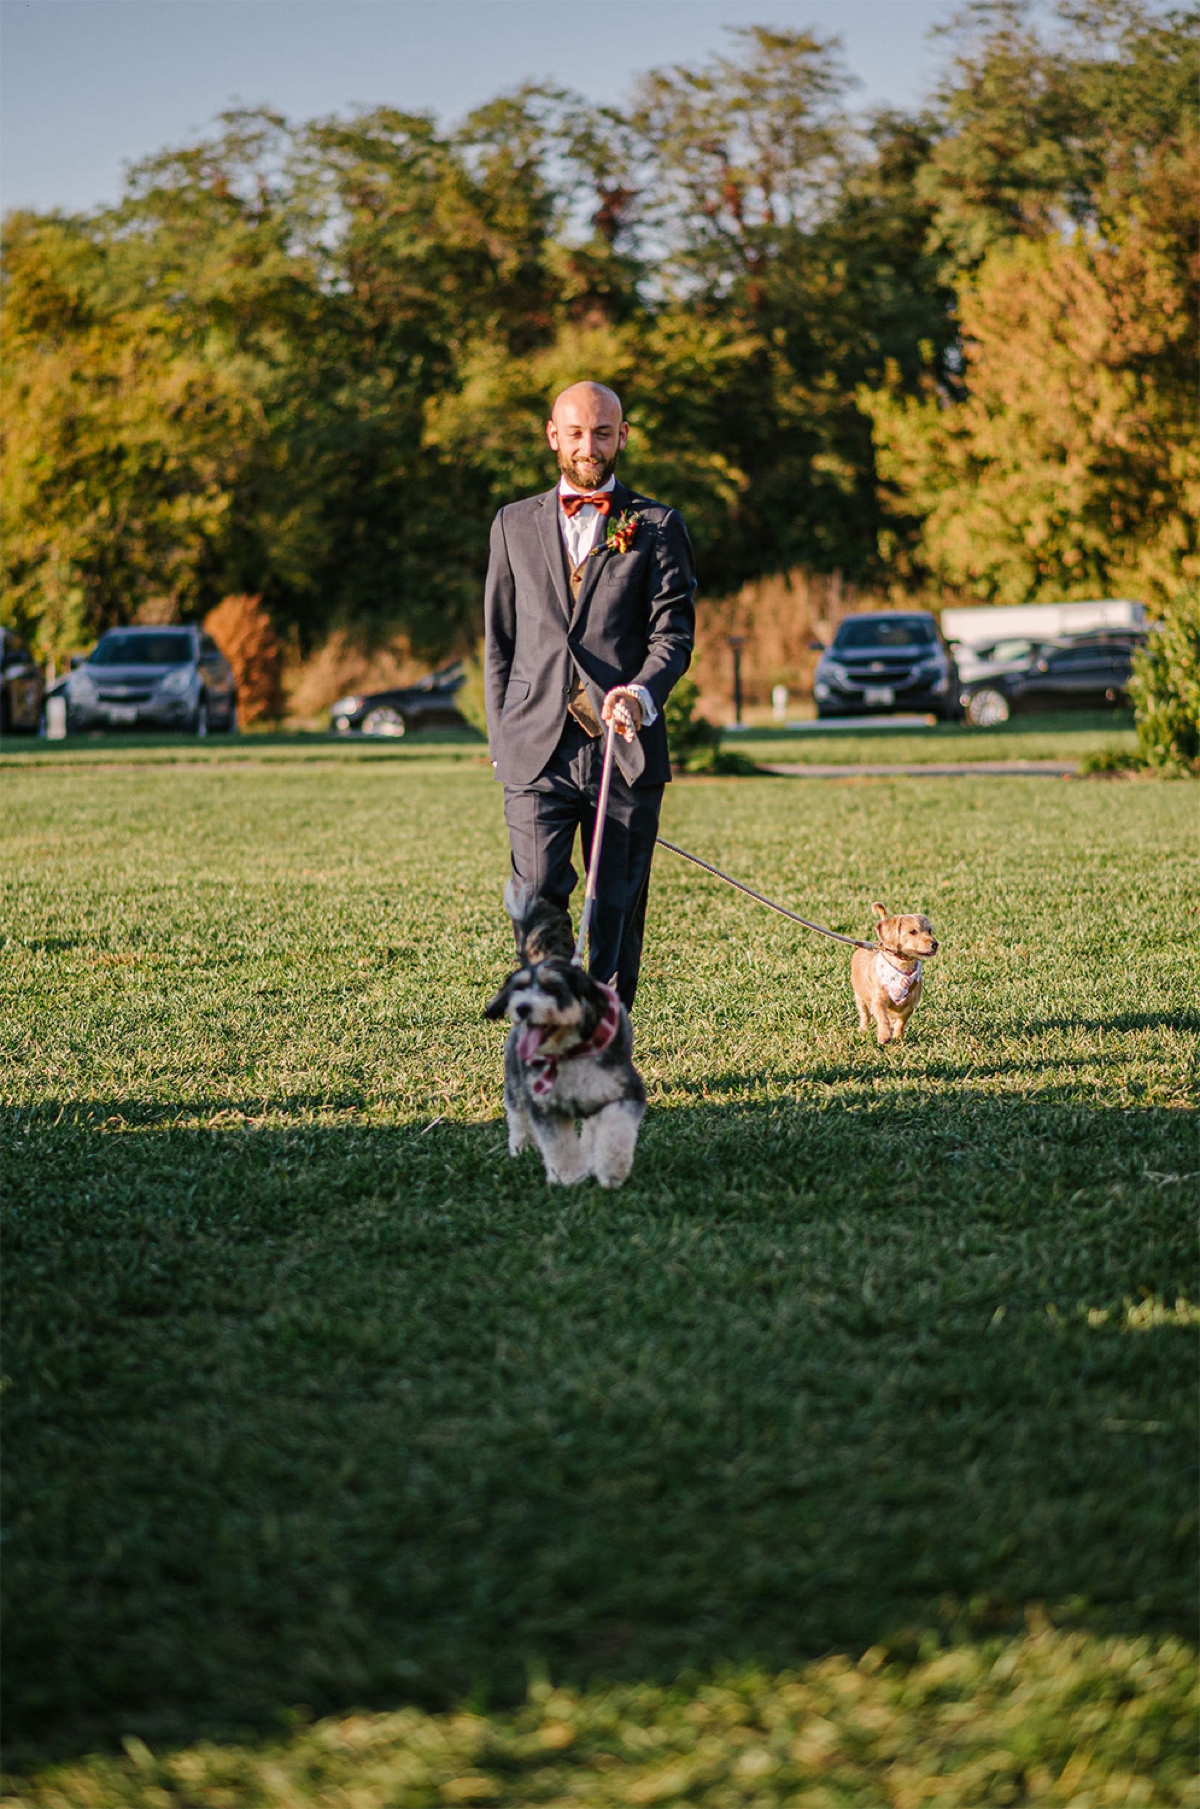 How to include your pet in your wedding